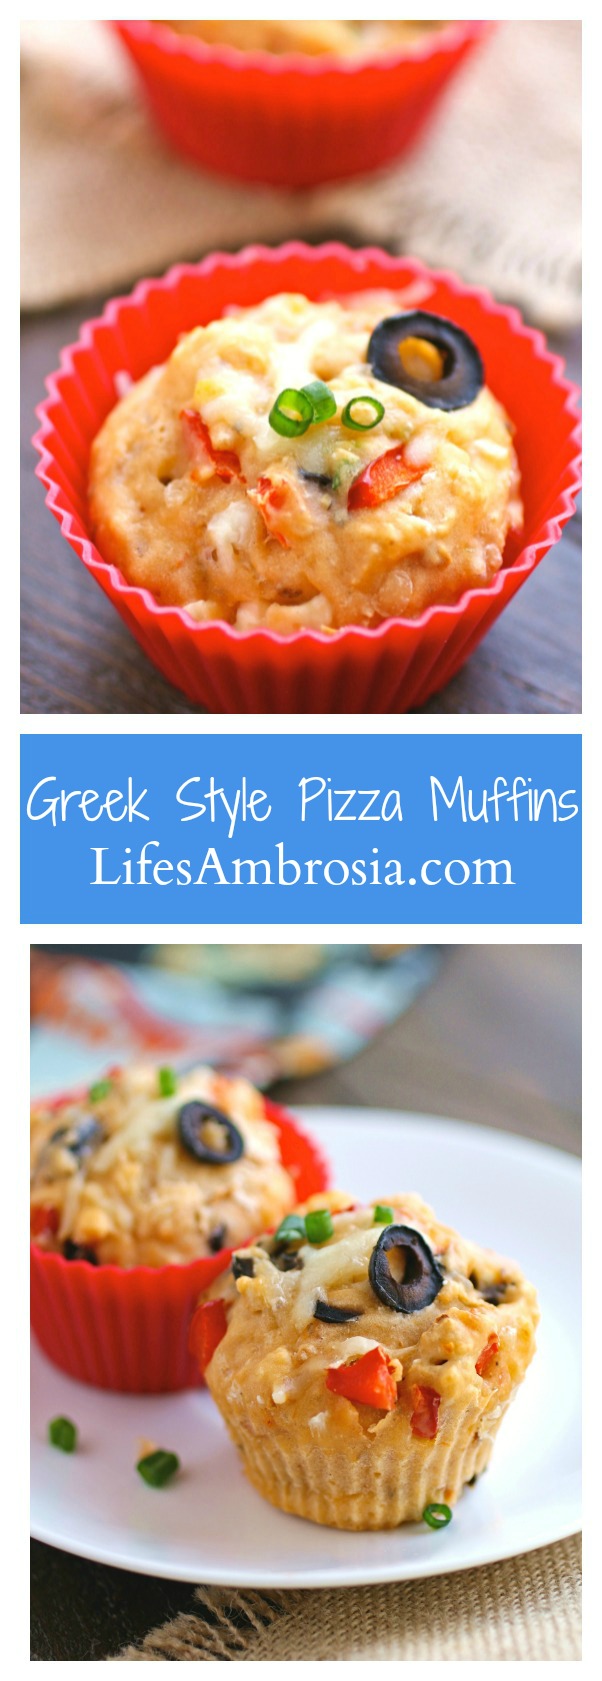 These easy Greek Style Pizza Muffins are great to have on hand for breakfasts and snacks on the go!